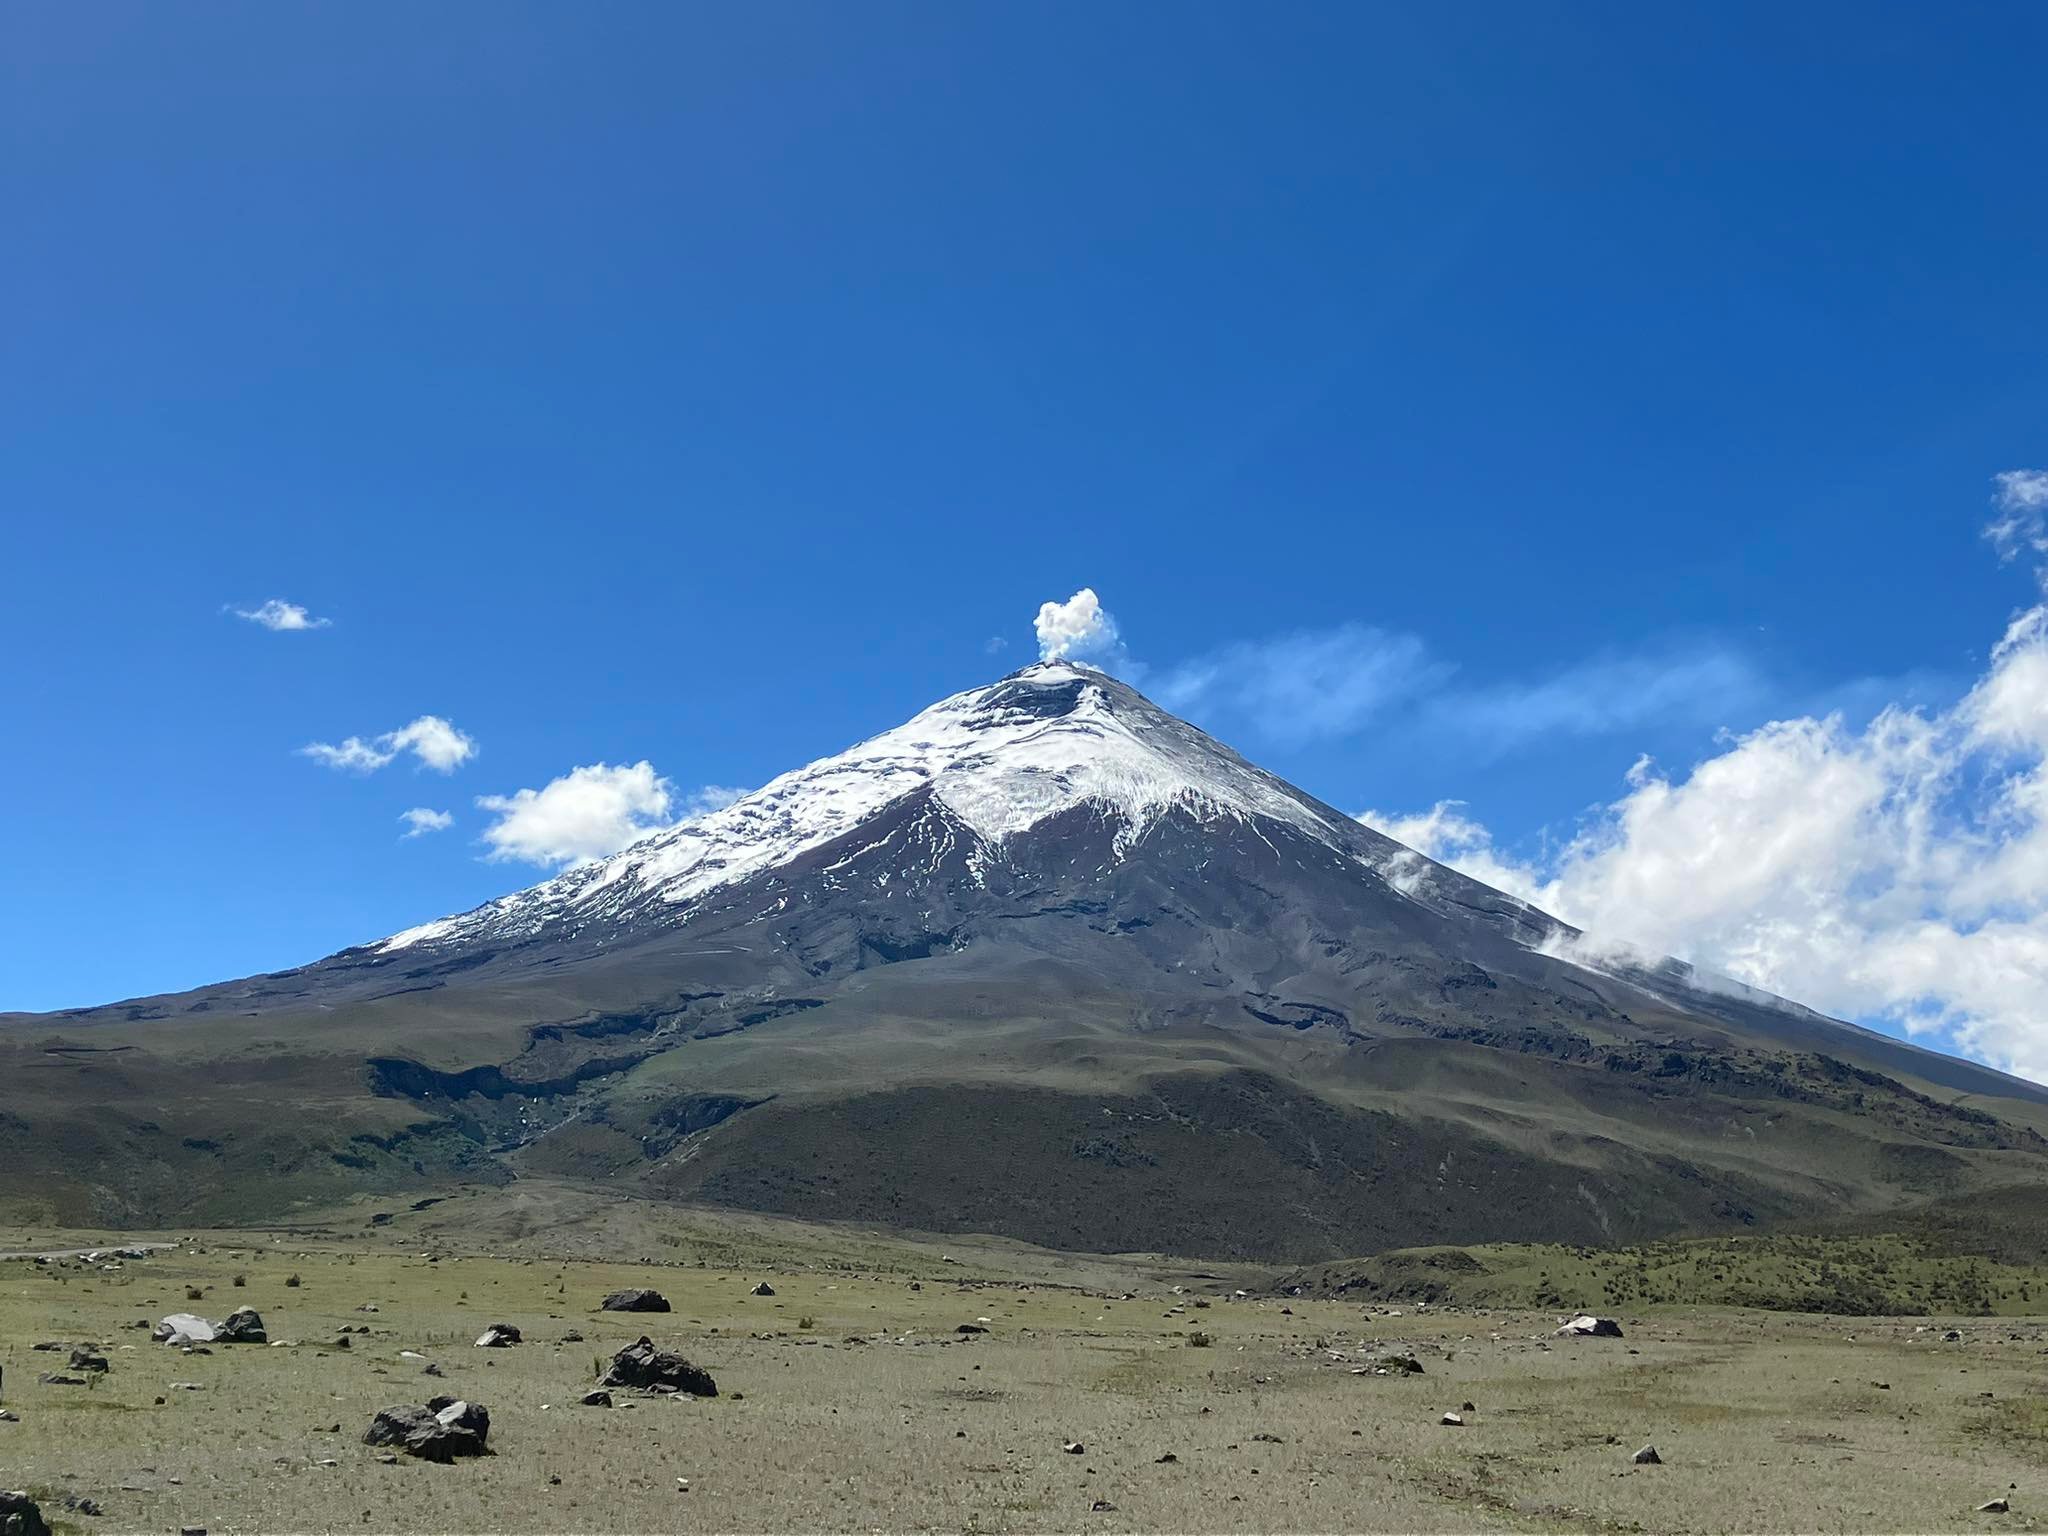 Degassing activity dominated at Cotopaxi at the time of visit of our friends (image: Erika Igondova)